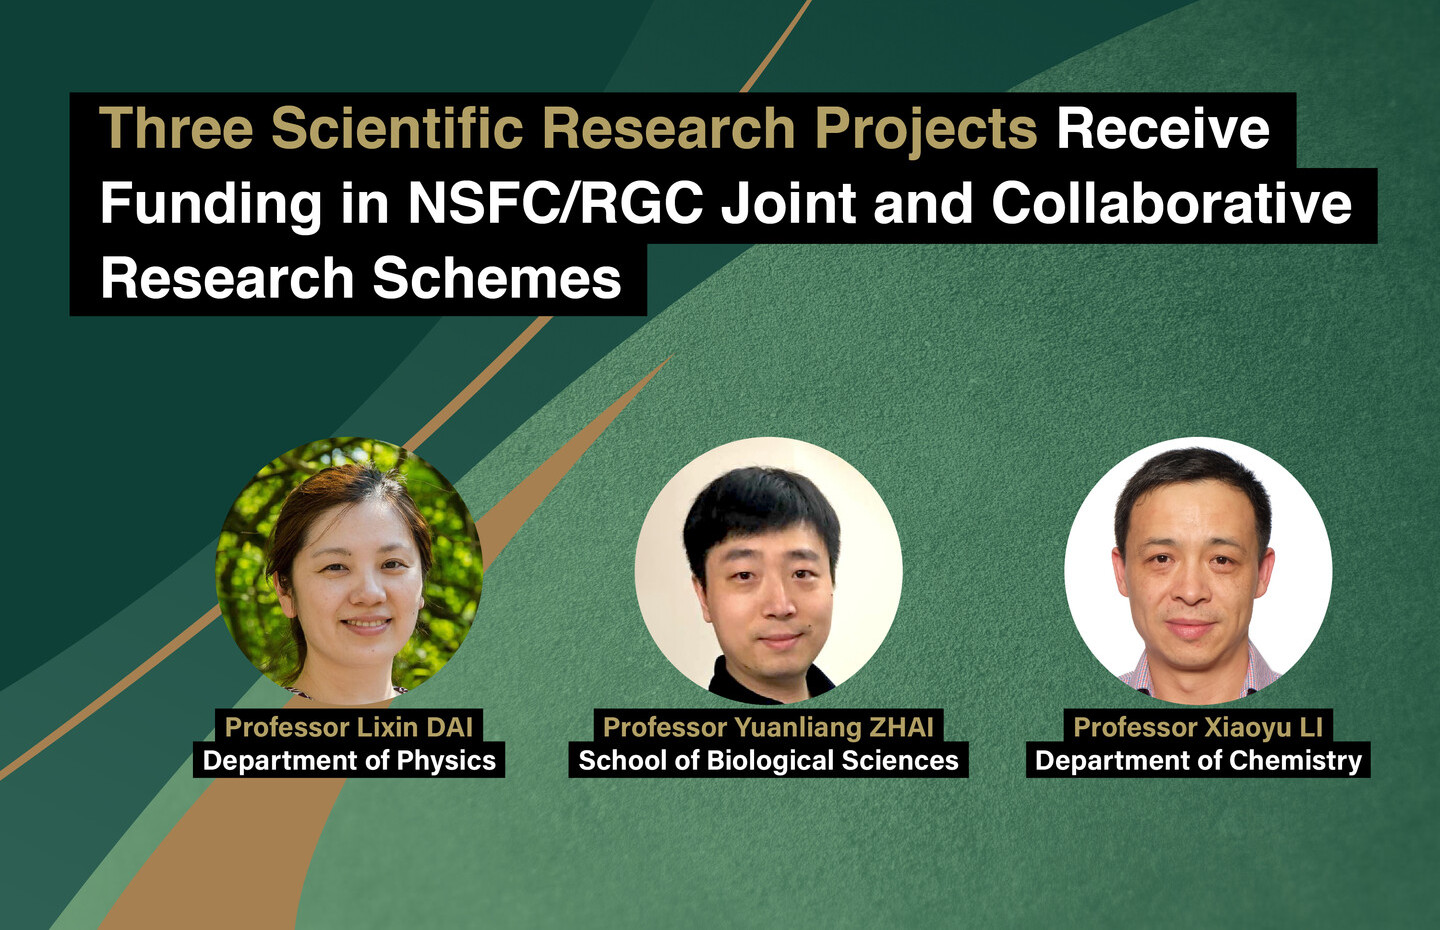 Three Scientific Research Projects Receive Funding in NSFC/RGC Joint and Collaborative Research Schemes